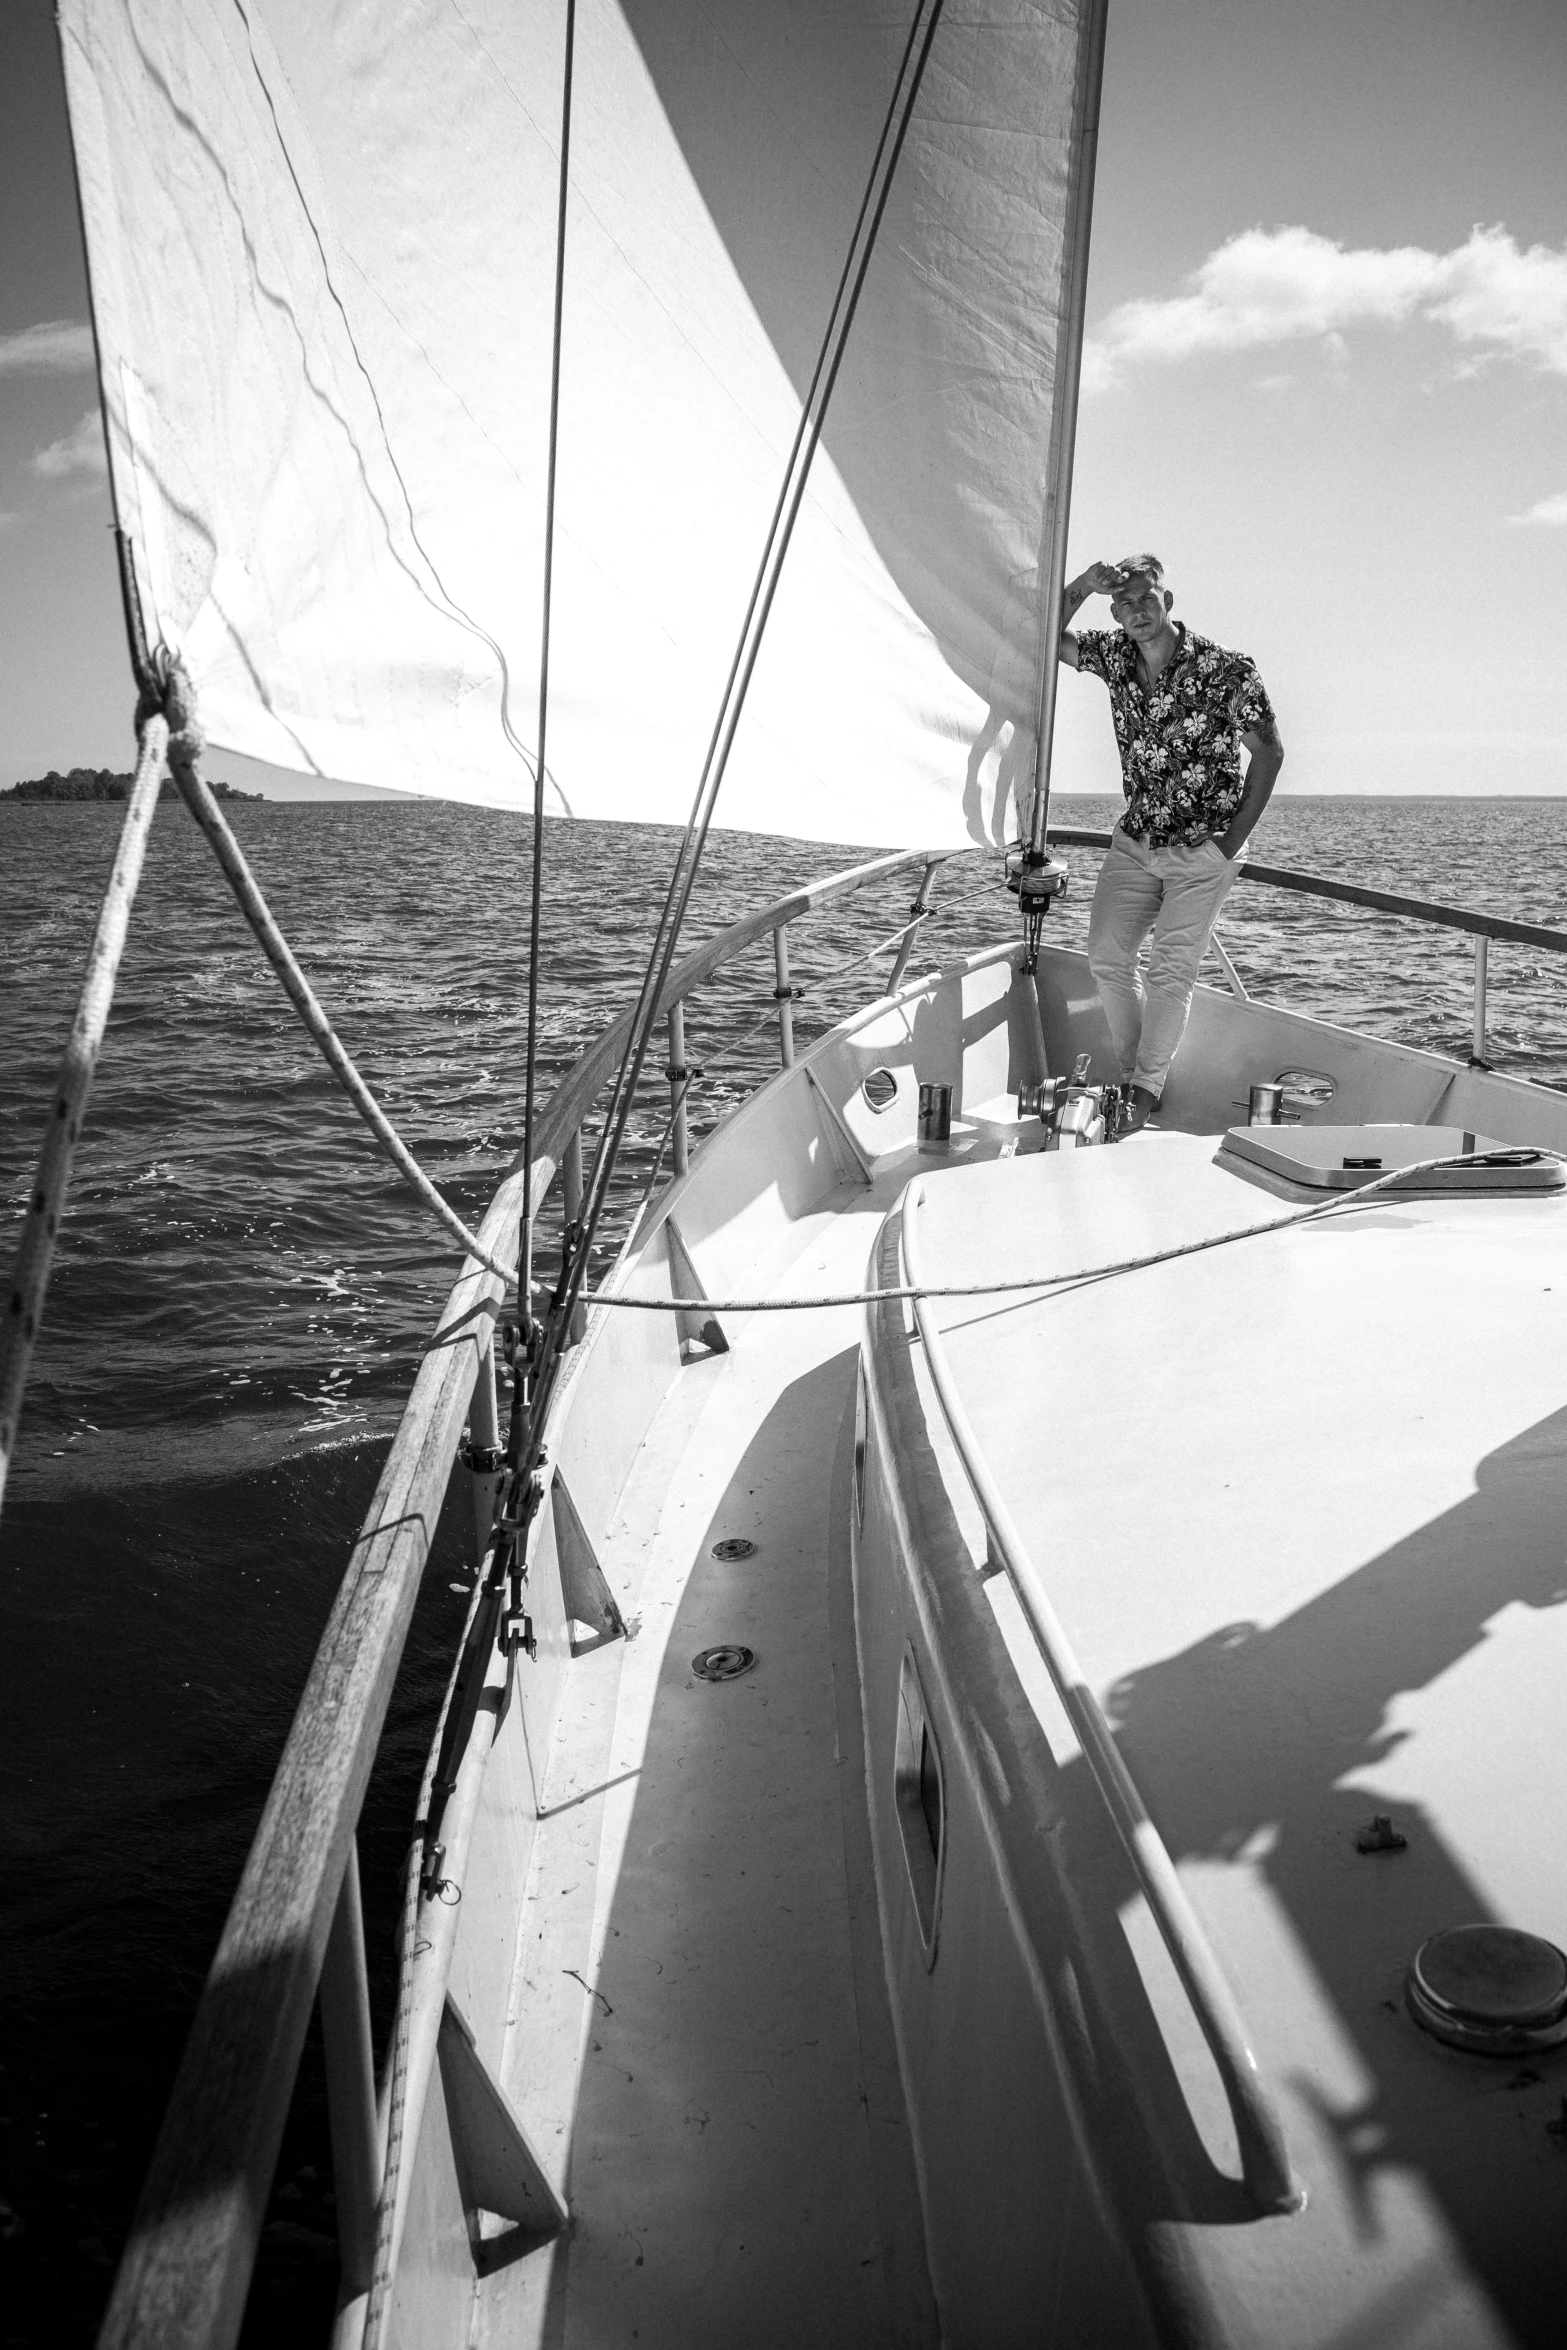 a black and white photo of a man on a sailboat, by Dave Melvin, happening, camaraderie, minn, action photograph, adventuring